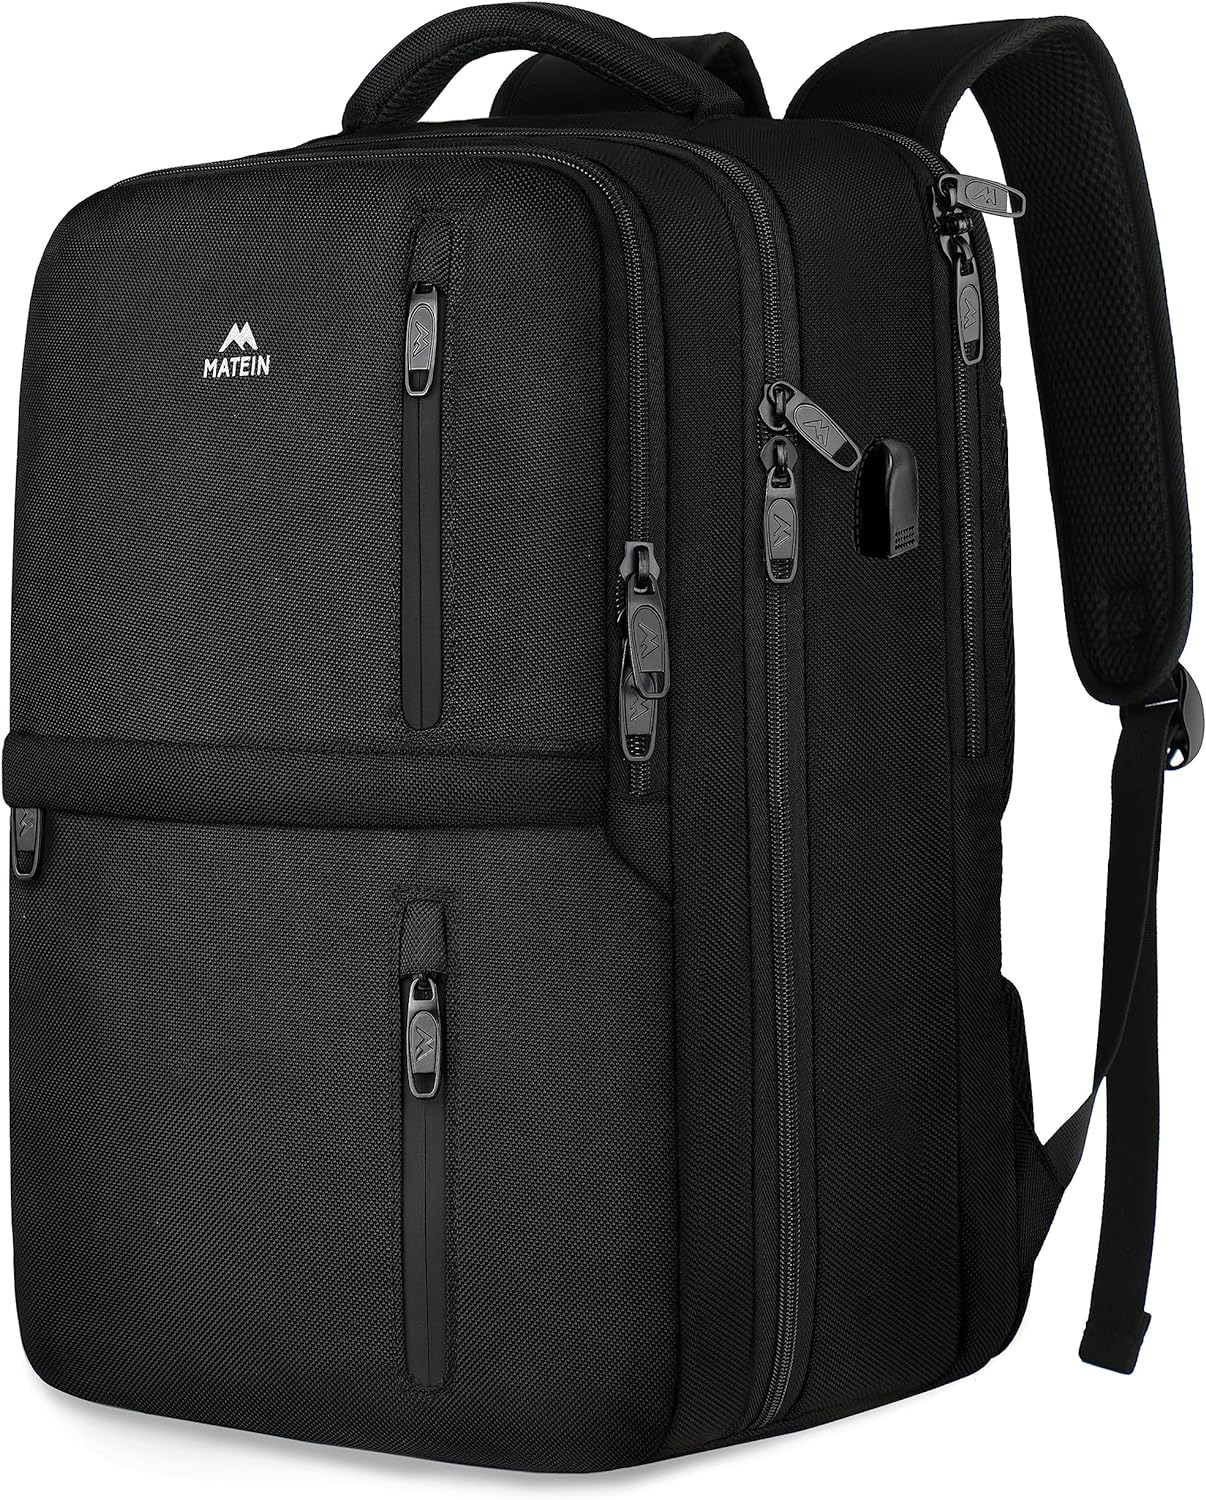 MATEIN Carry on Backpack, 40L Flight Approved Large Travel Laptop Backpack with